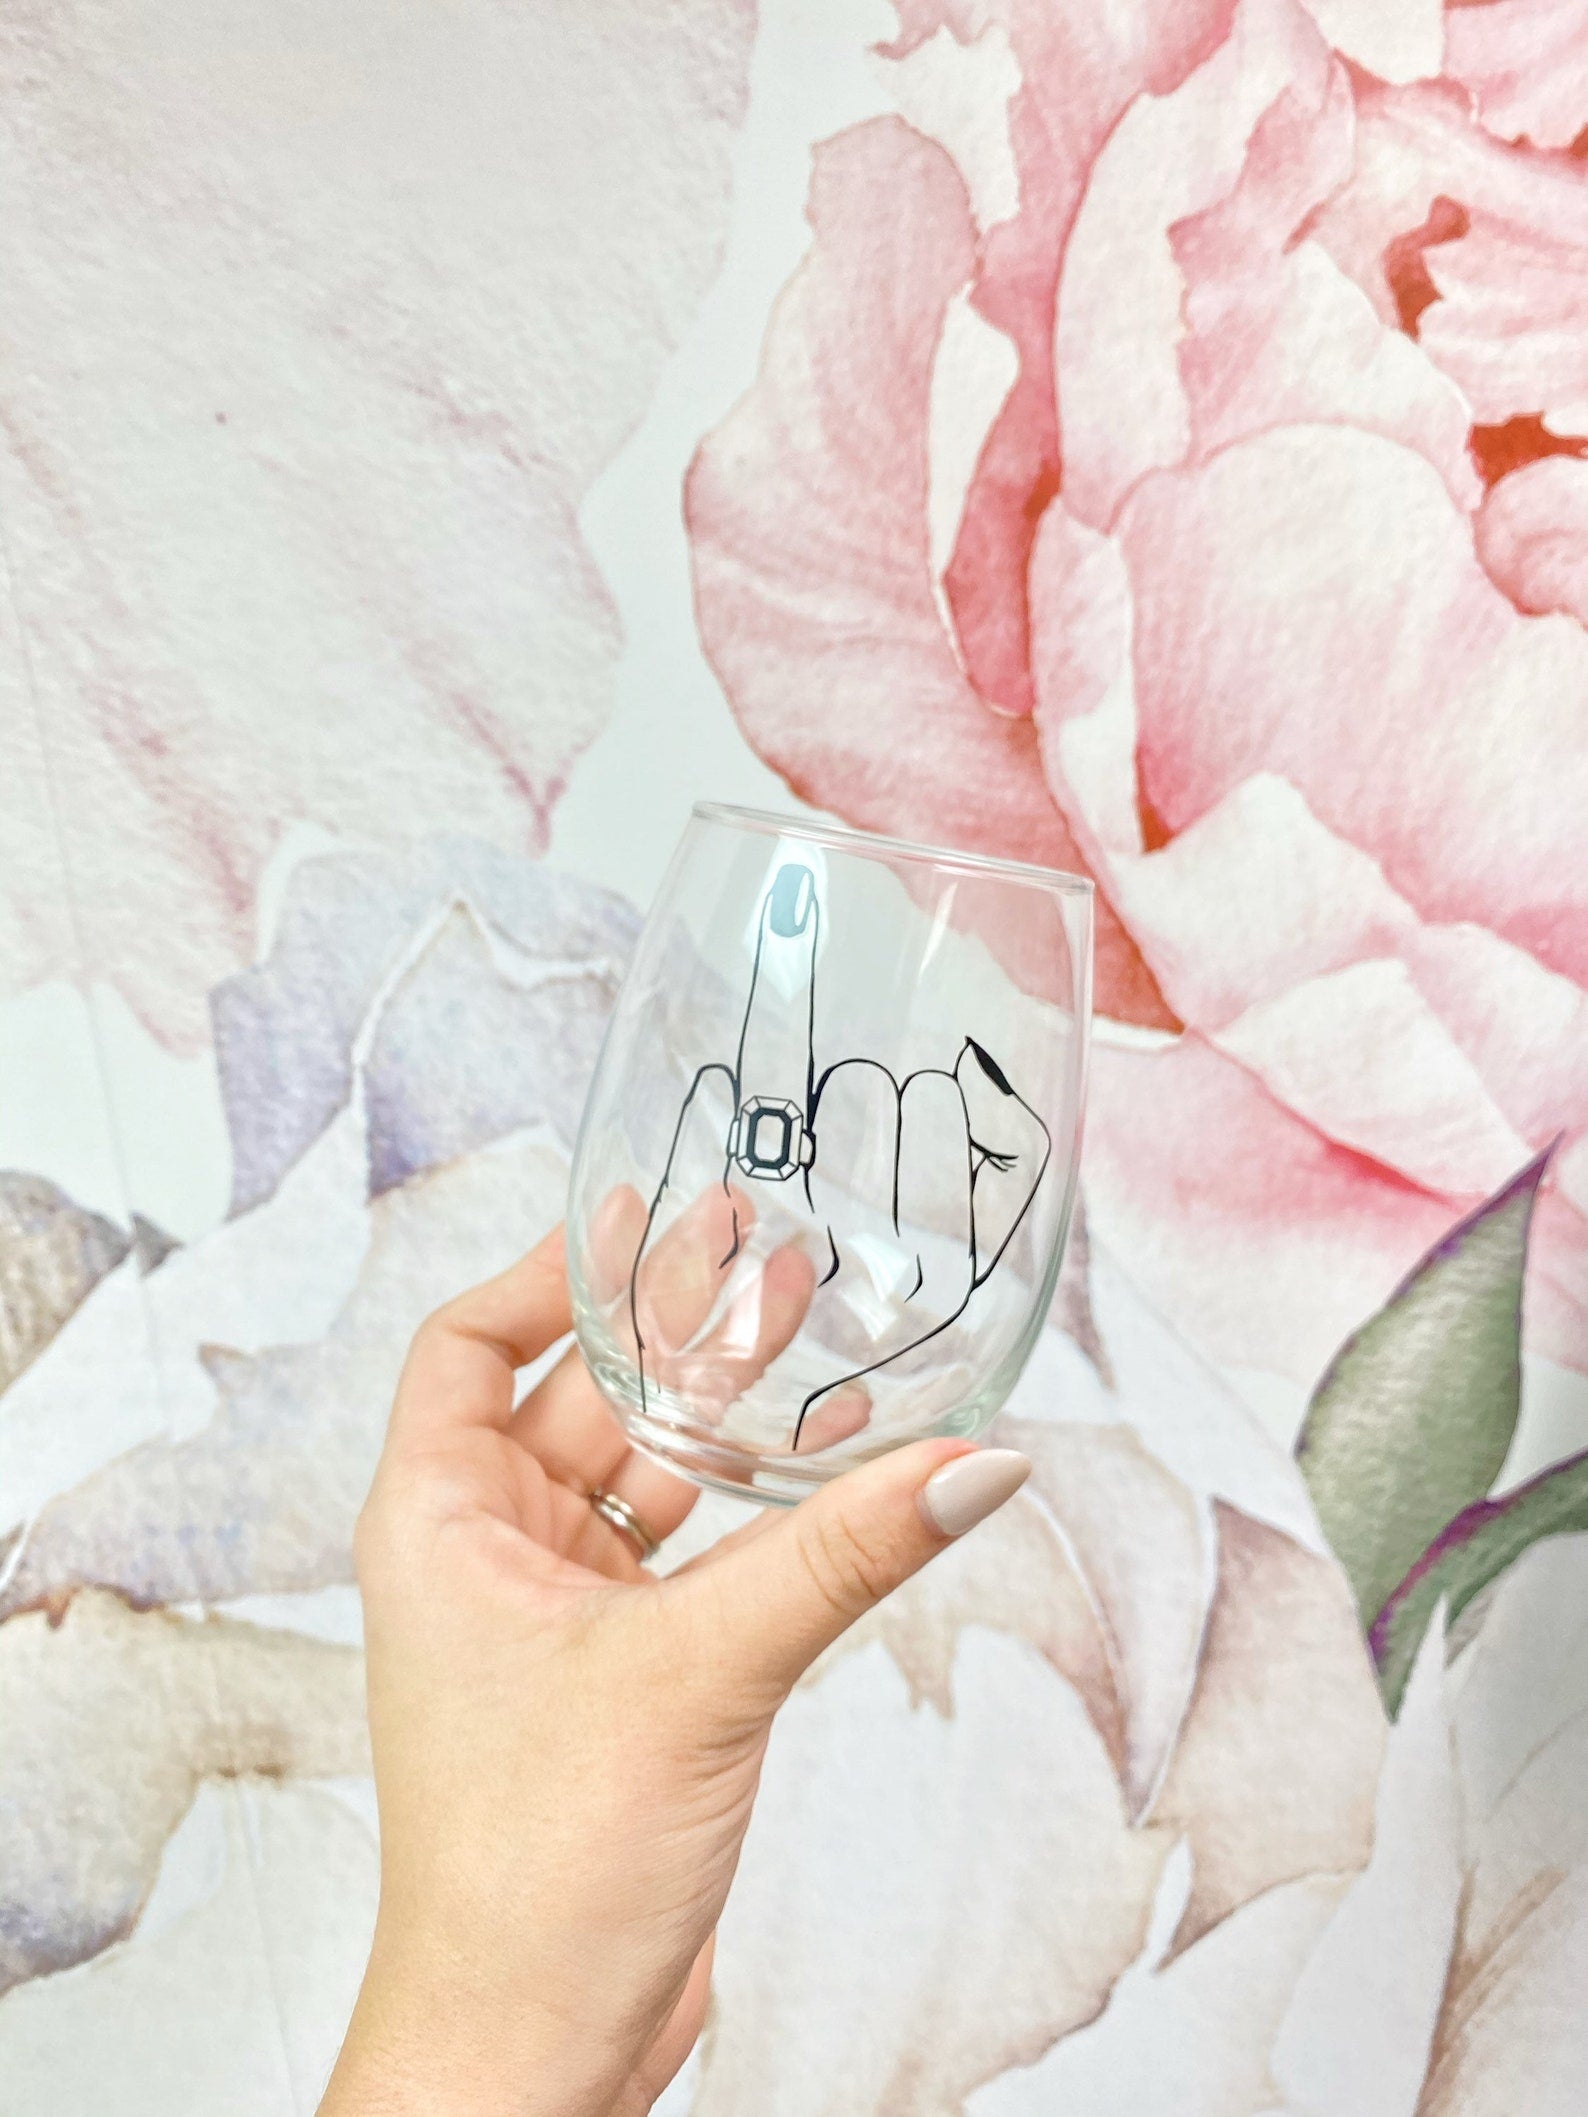 Wedding ring finger wine glass - bride glass future mrs cup - engagement gift idea- wifey mug- engaged af wine glass wedding day gift ideas  Bestseller